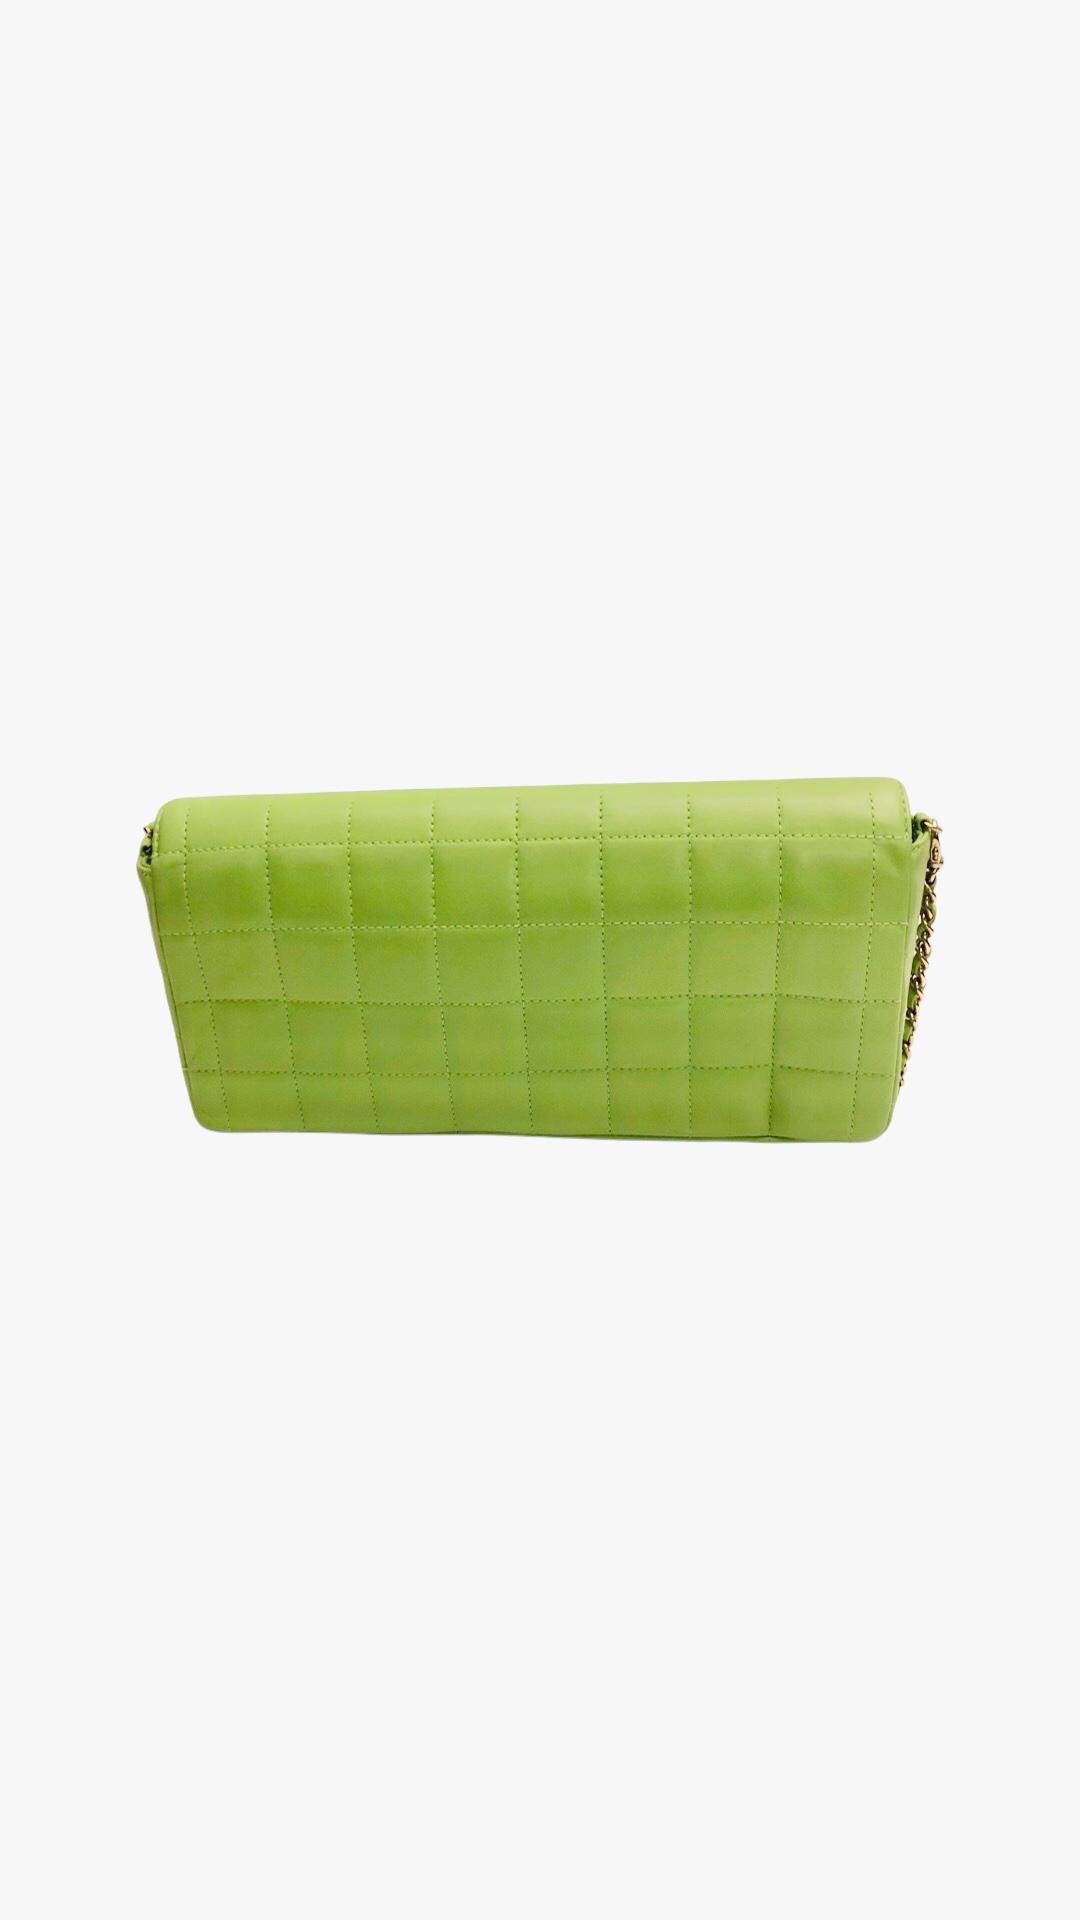 - Chanel green lambskin chocolate bar flap shoulder bag from year 2000-2002 collection. 

- green lambskin leather and gold hardware chain strap. 
 
- green  leather interior. 

- Two interior slip pockets. 

- Gold hardware CC turnlock closure. 

-